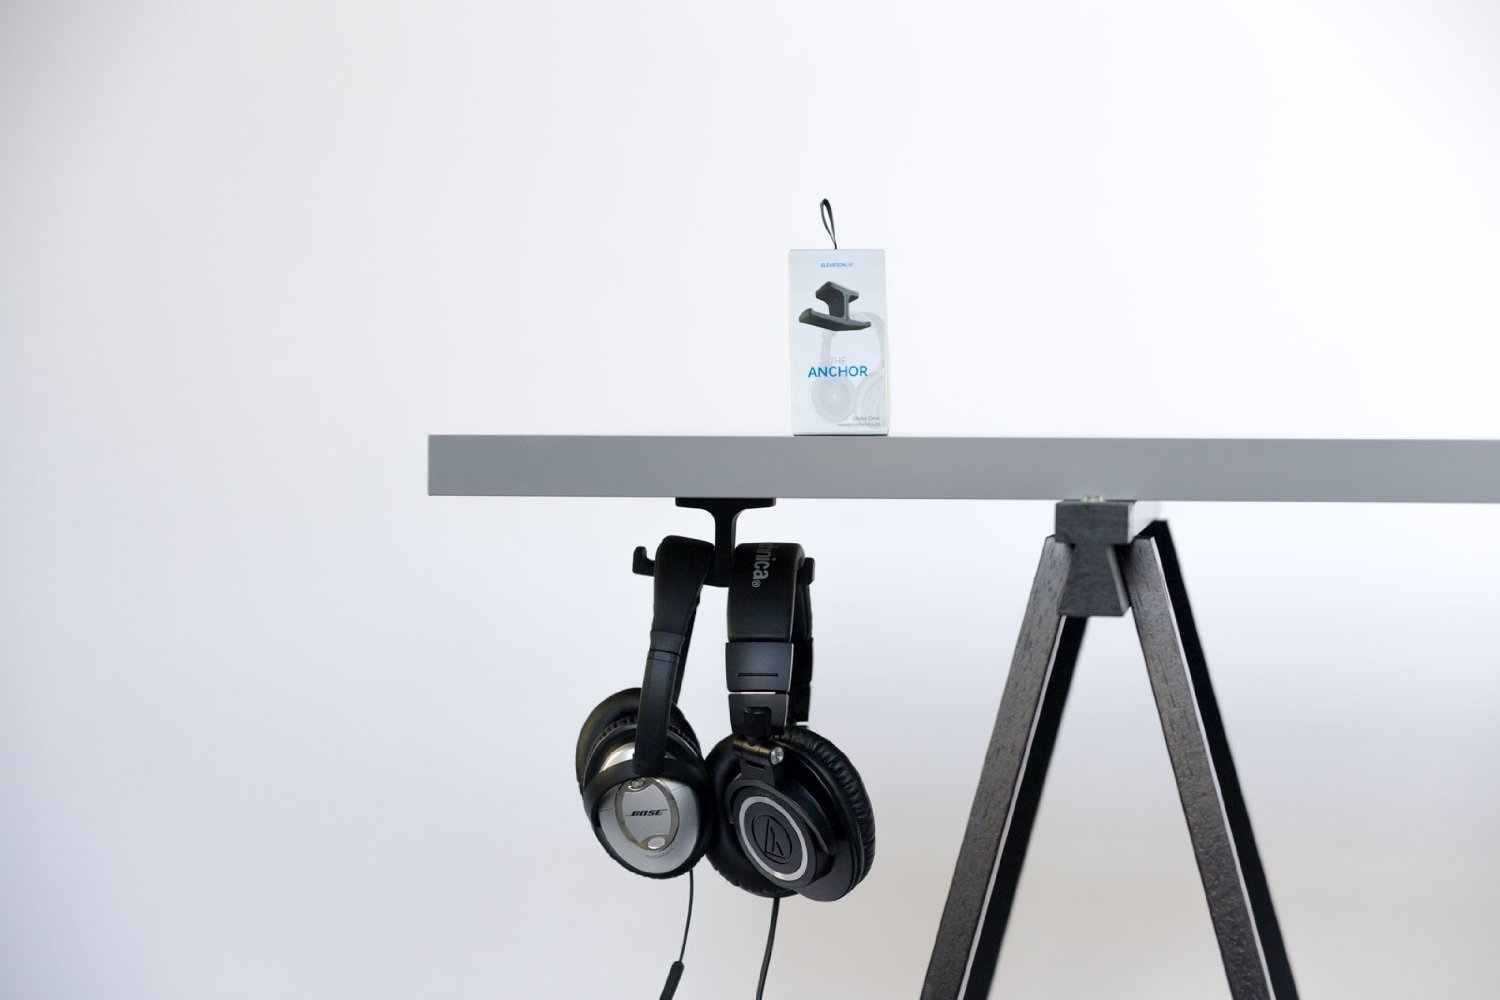 http://audiophilereview.com/images/anchorstand.jpg